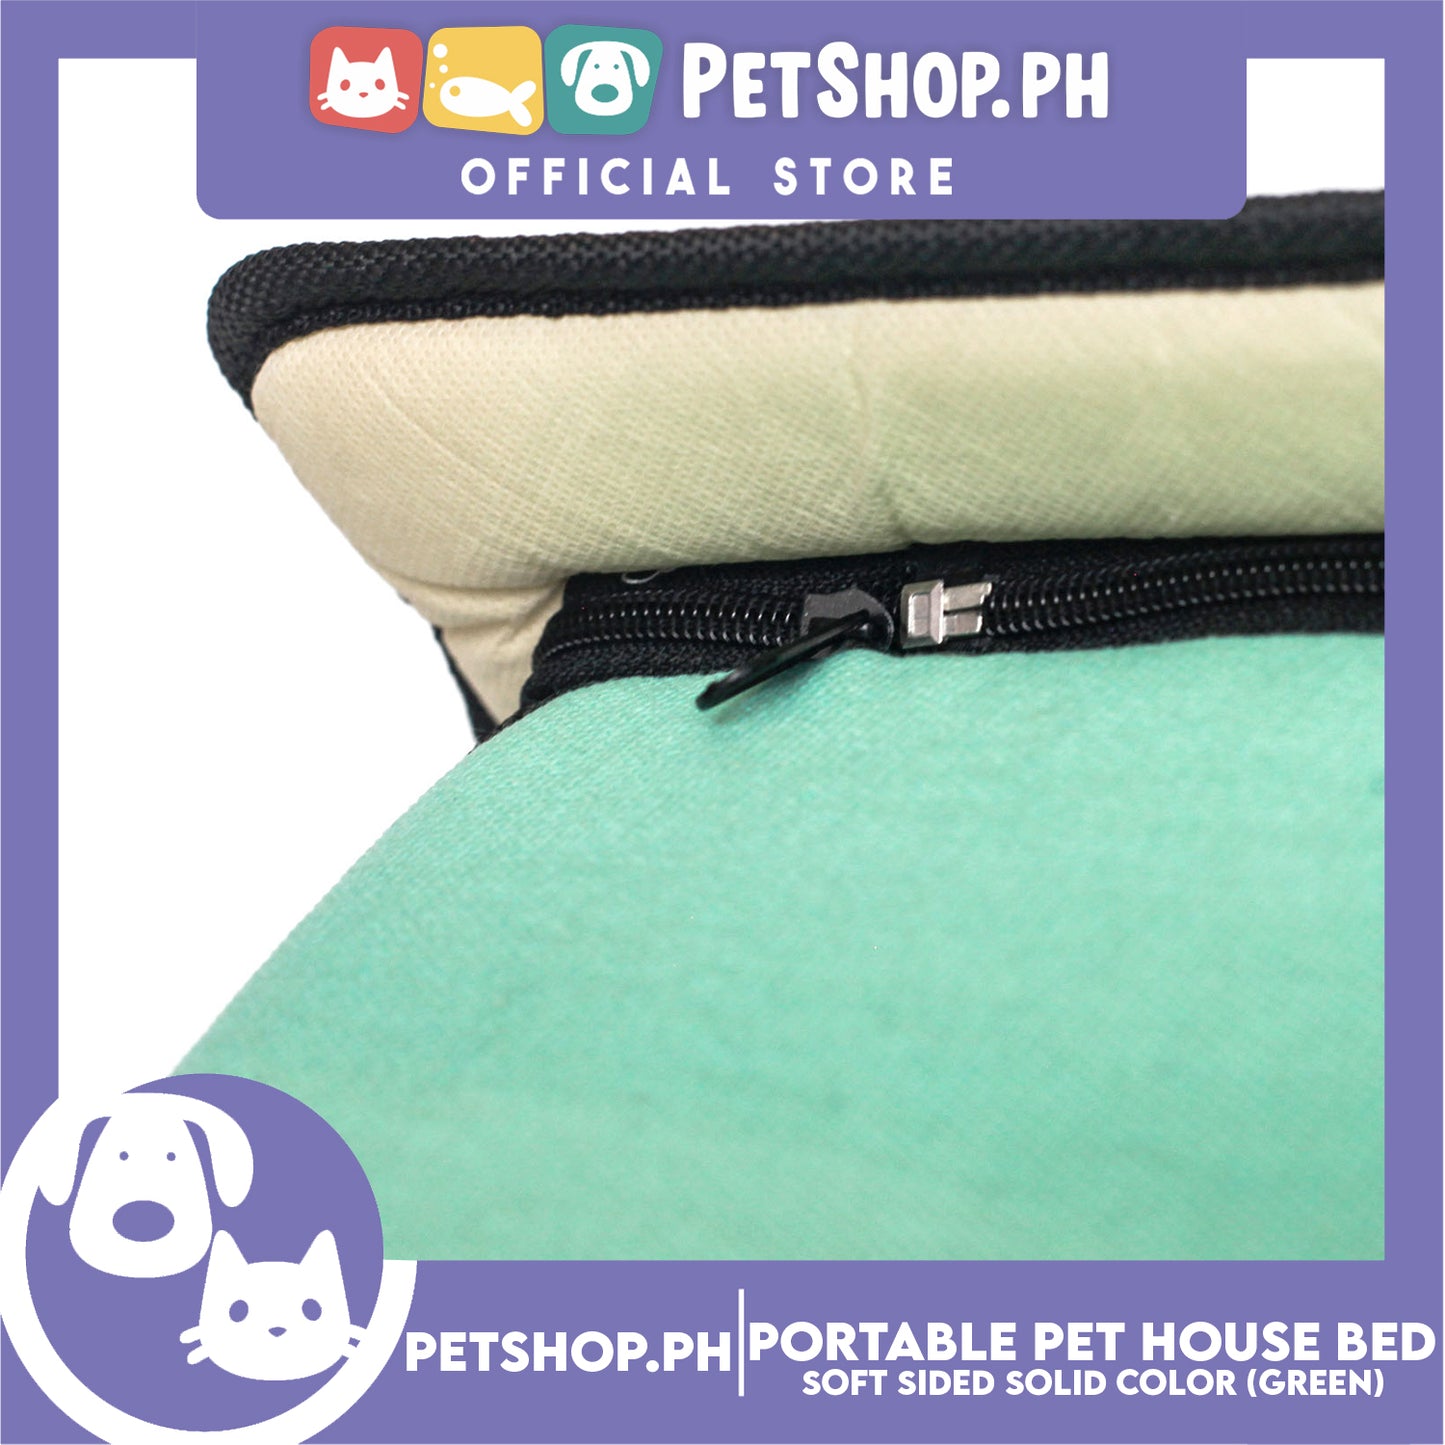 Portable Pet House Bed With Soft Sided Solid Color 30x33x32cm Medium (Mint Green)